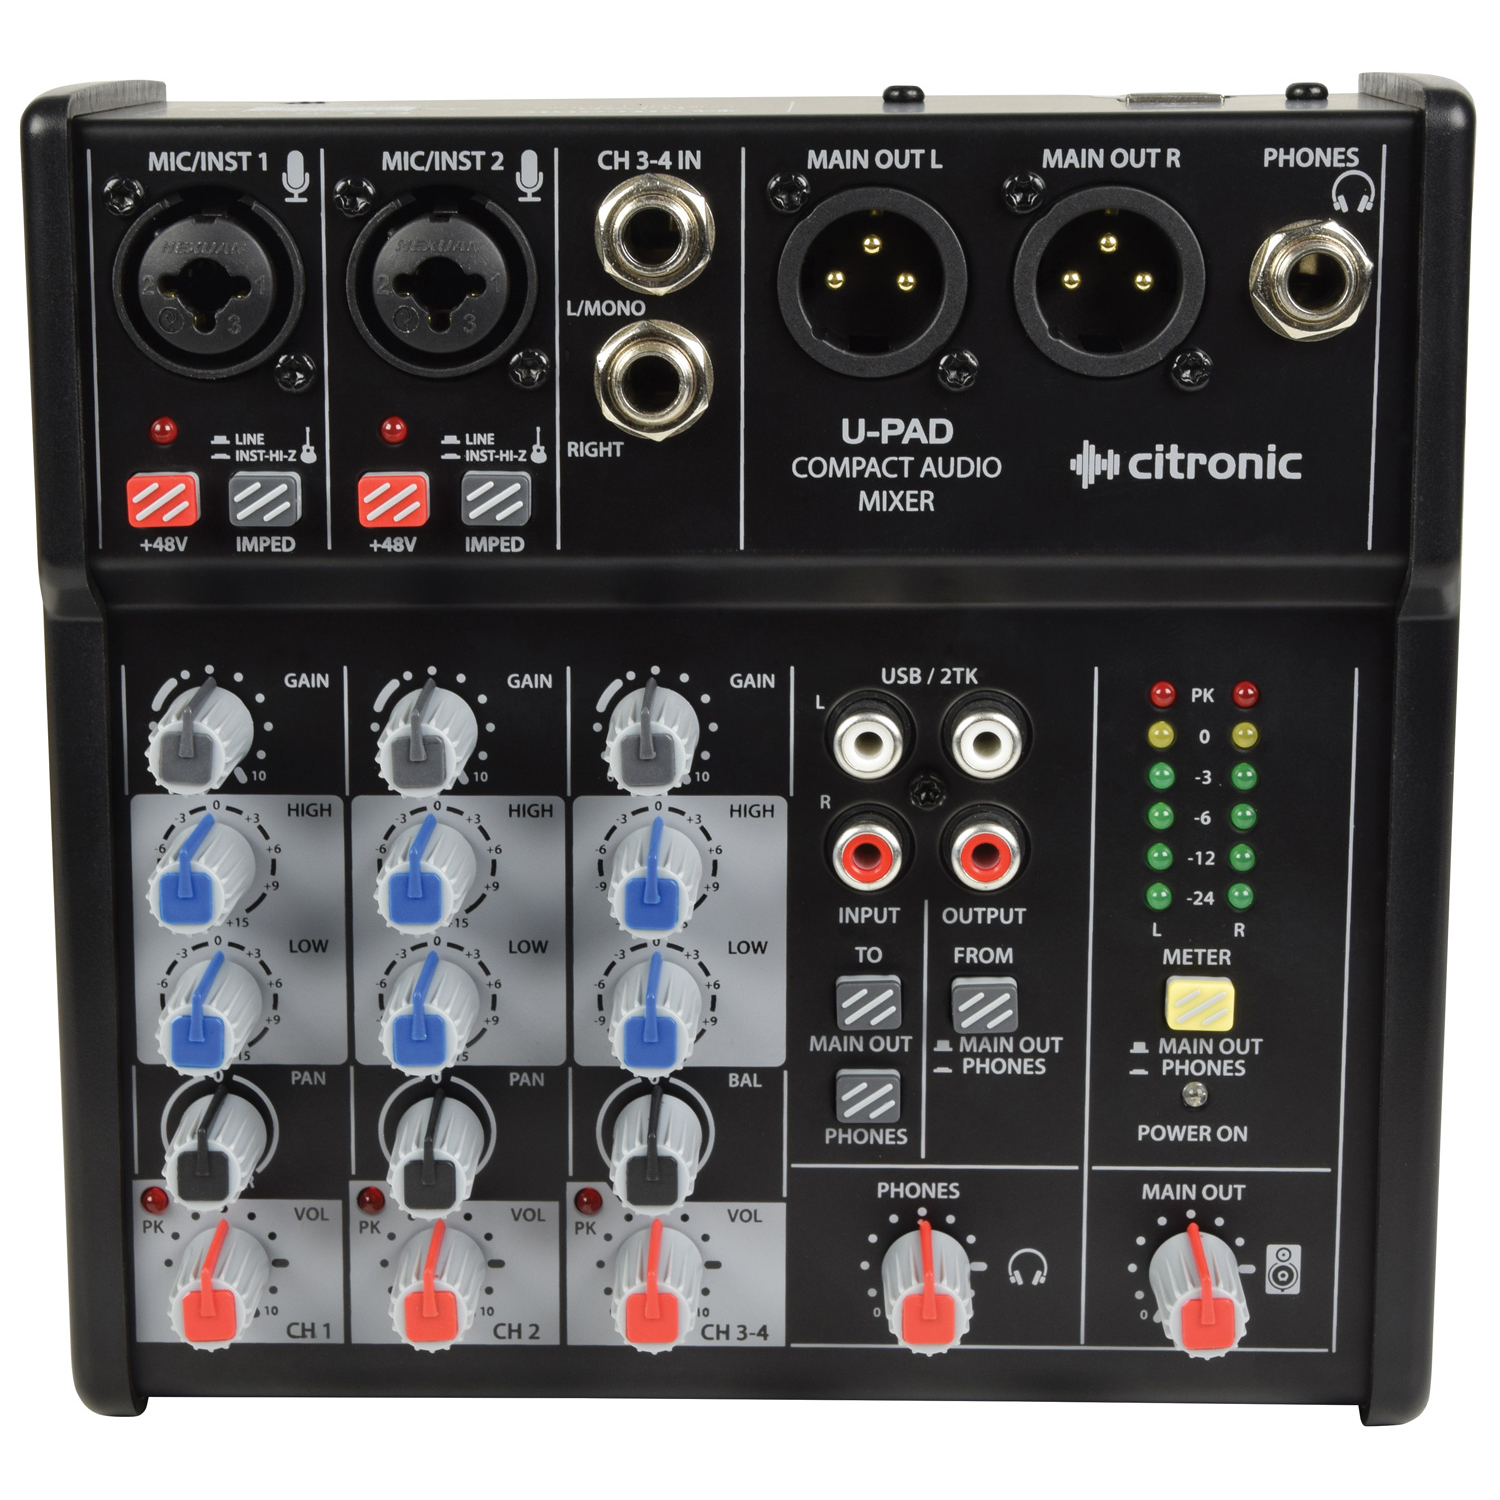 Opus Compact Mixer l8 USB +delay. Micromix-8s. Цитроник. Adastra interface.